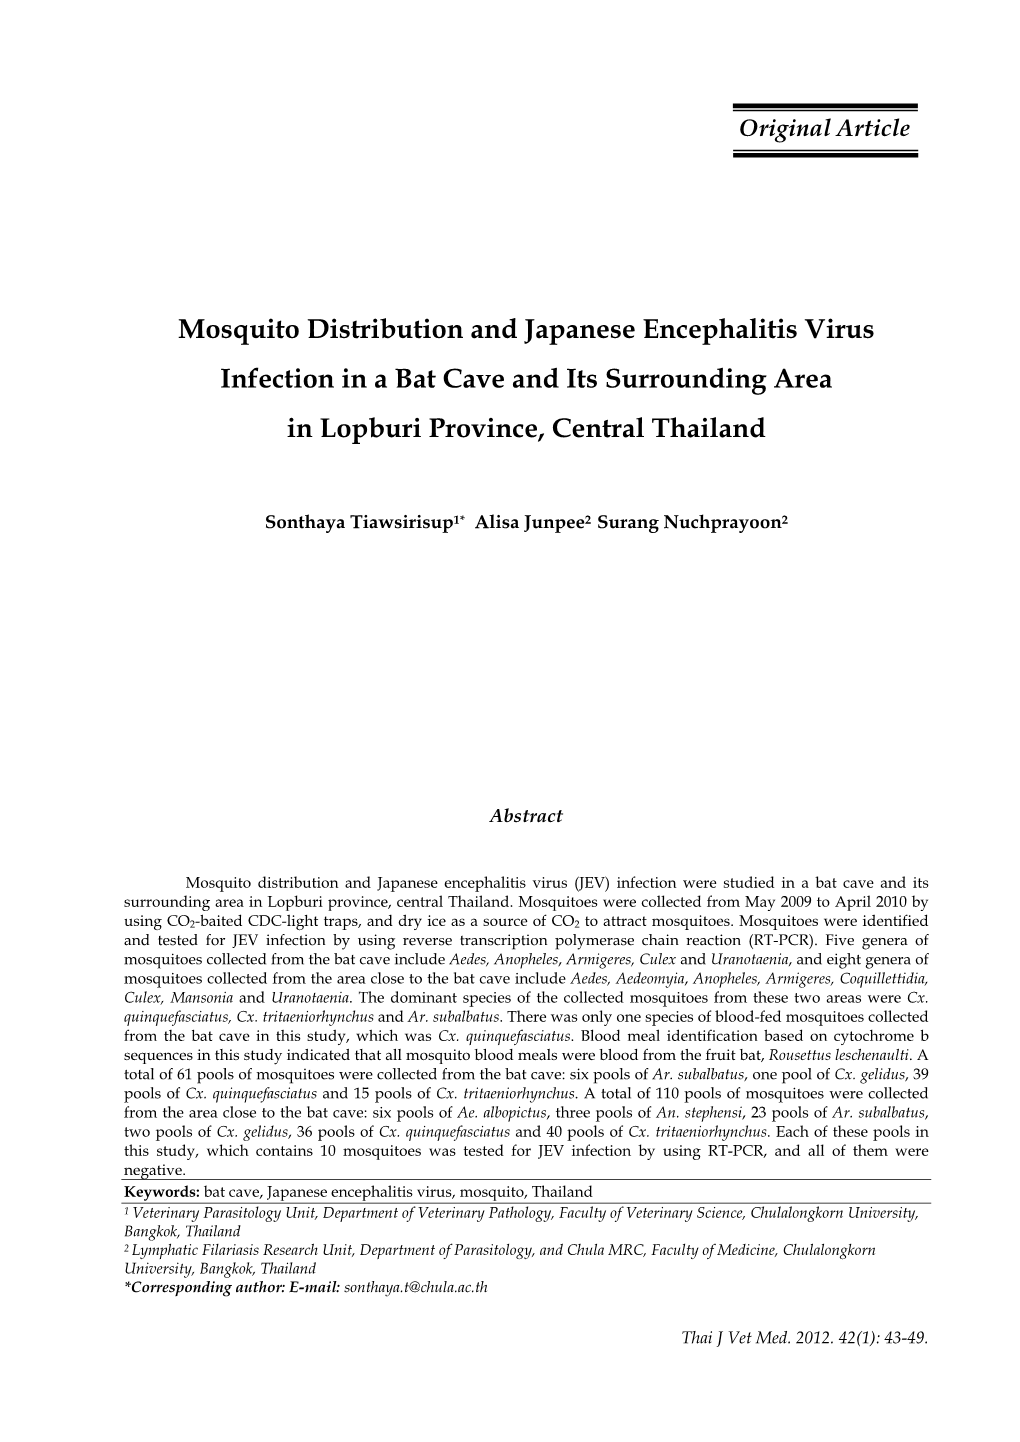 Mosquito Distribution and Japanese Encephalitis Virus Infection in a Bat Cave and Its Surrounding Area in Lopburi Province, Central Thailand